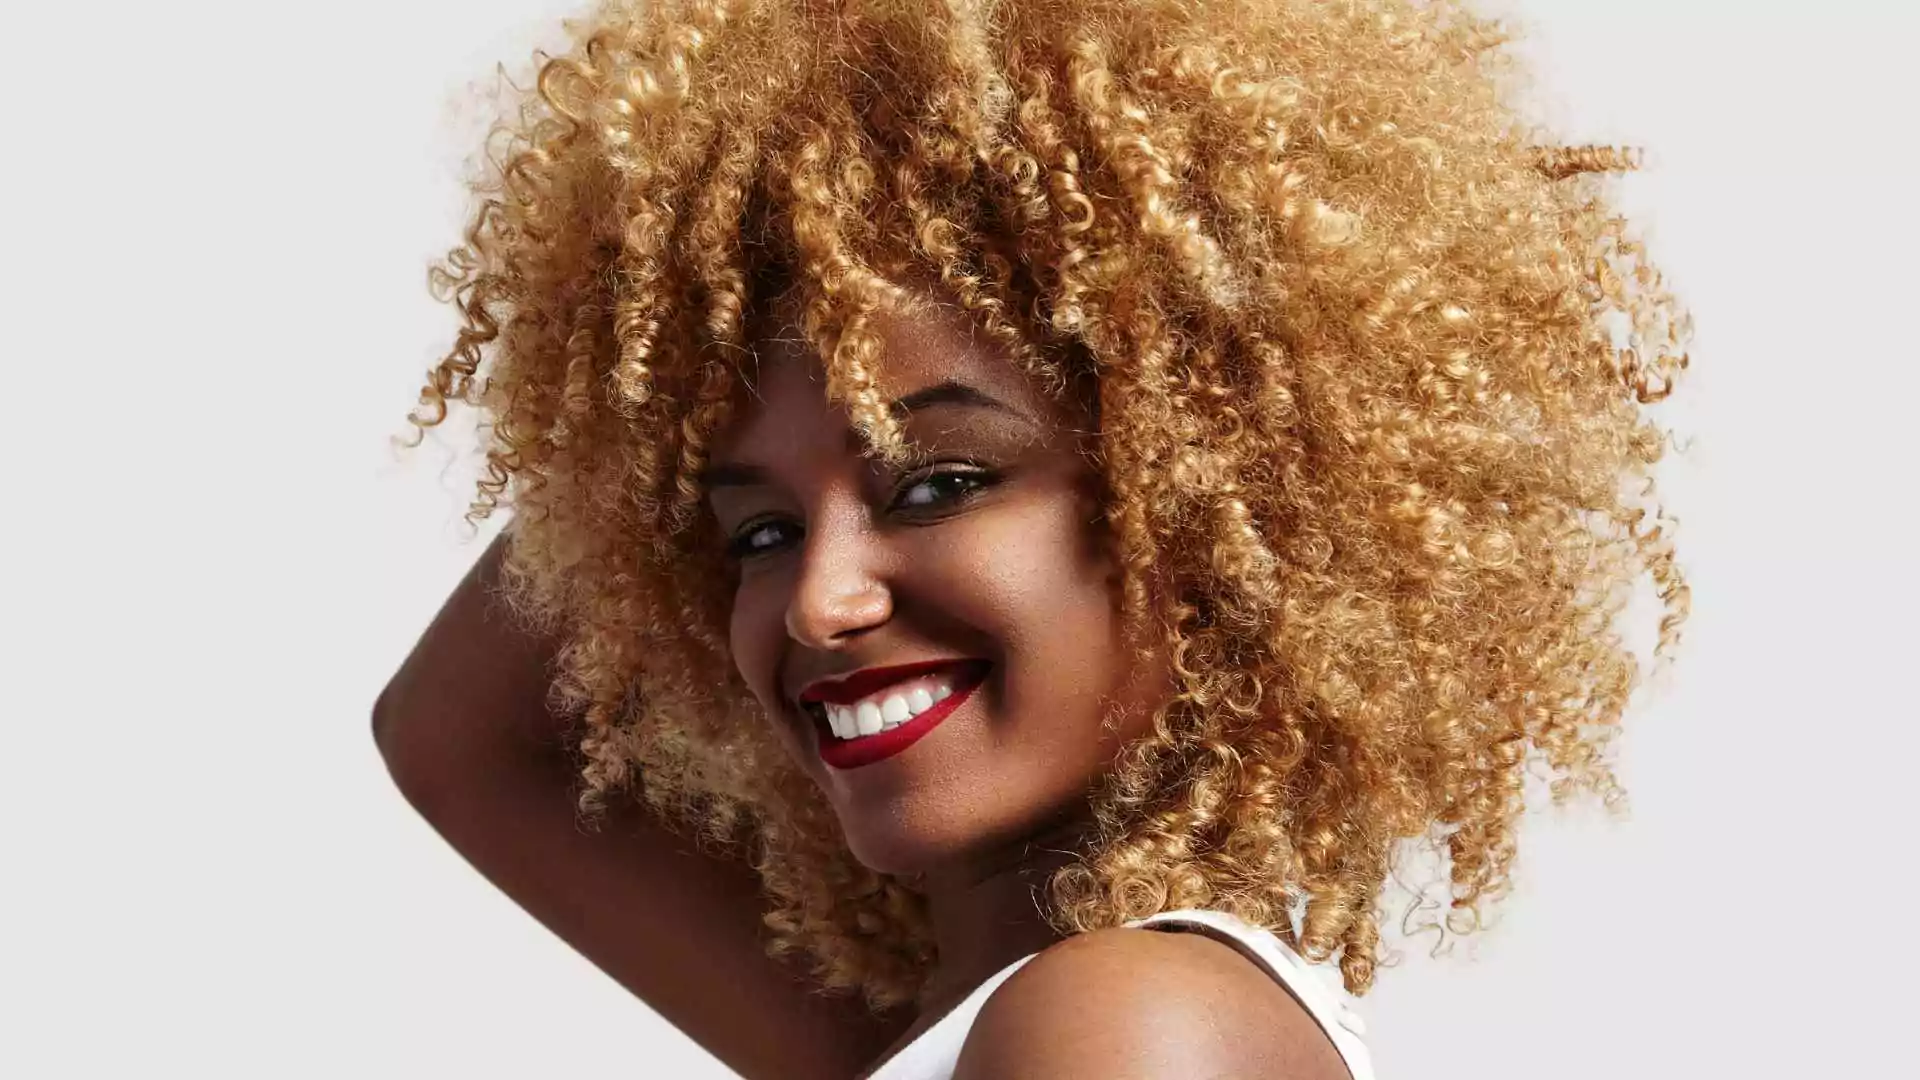 Smiling female with bleached afro hair 